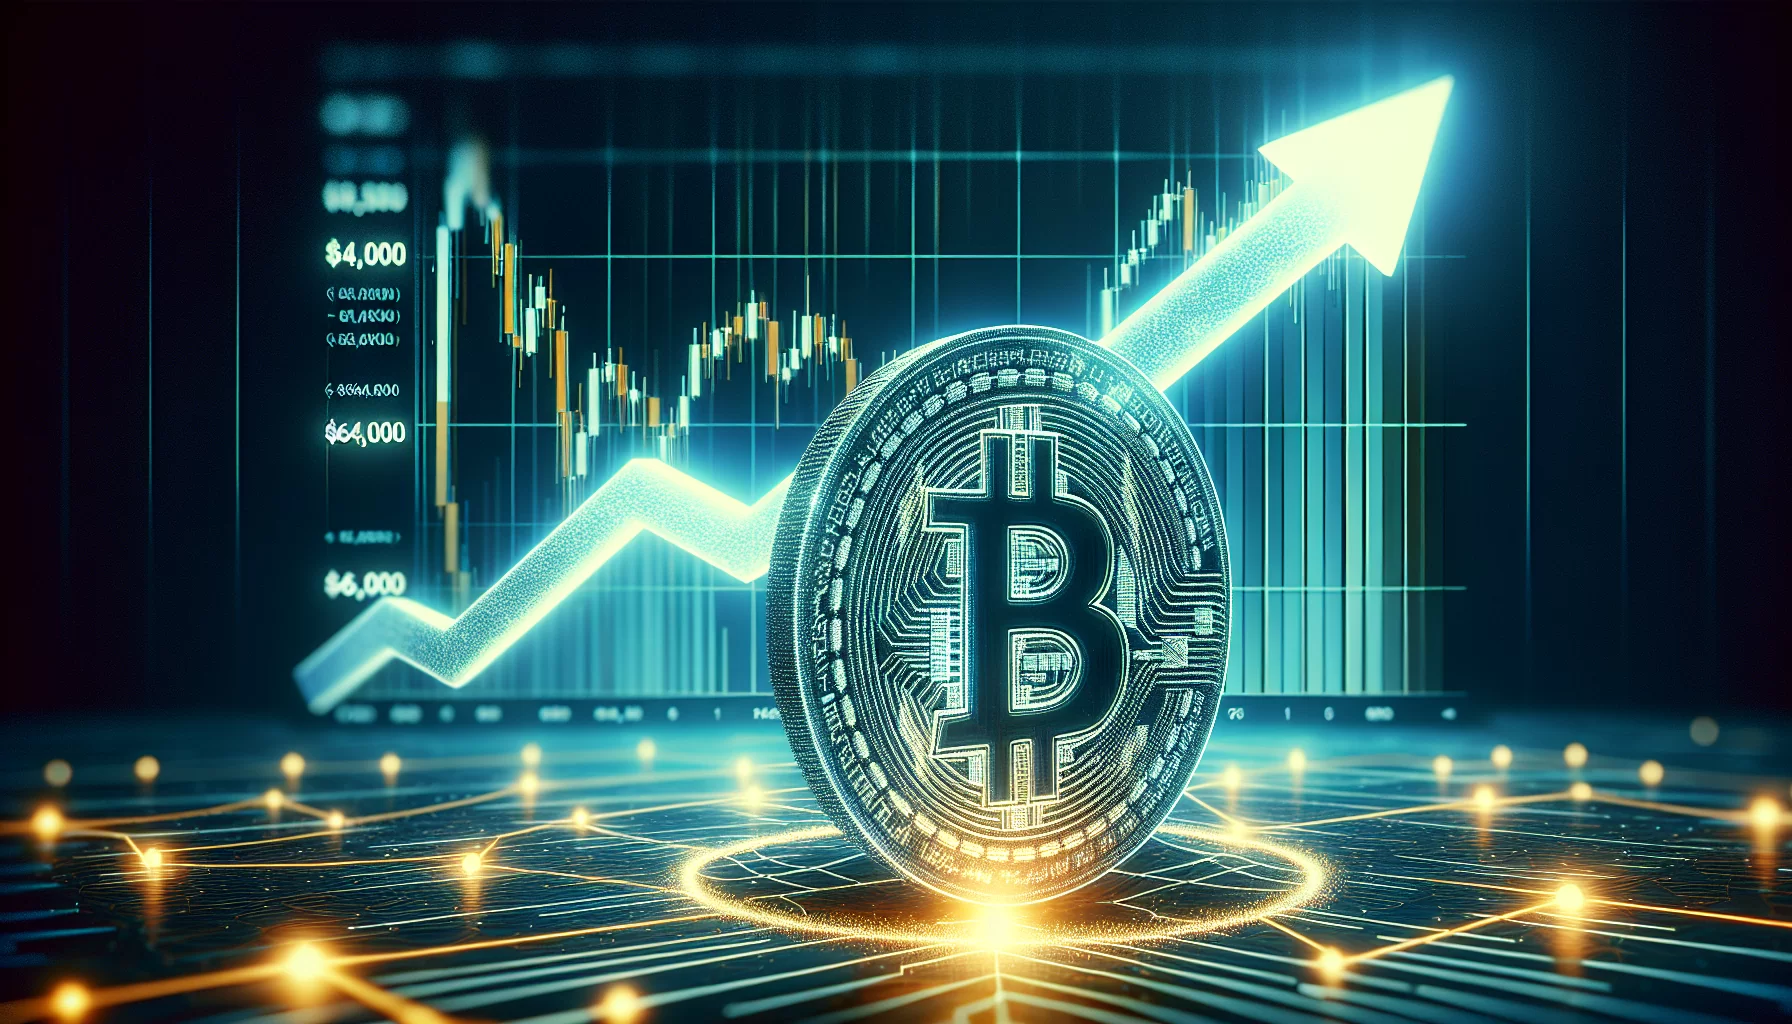 Bitcoin's short-term holder realized price hits $64,000: a sign of imminent rally?